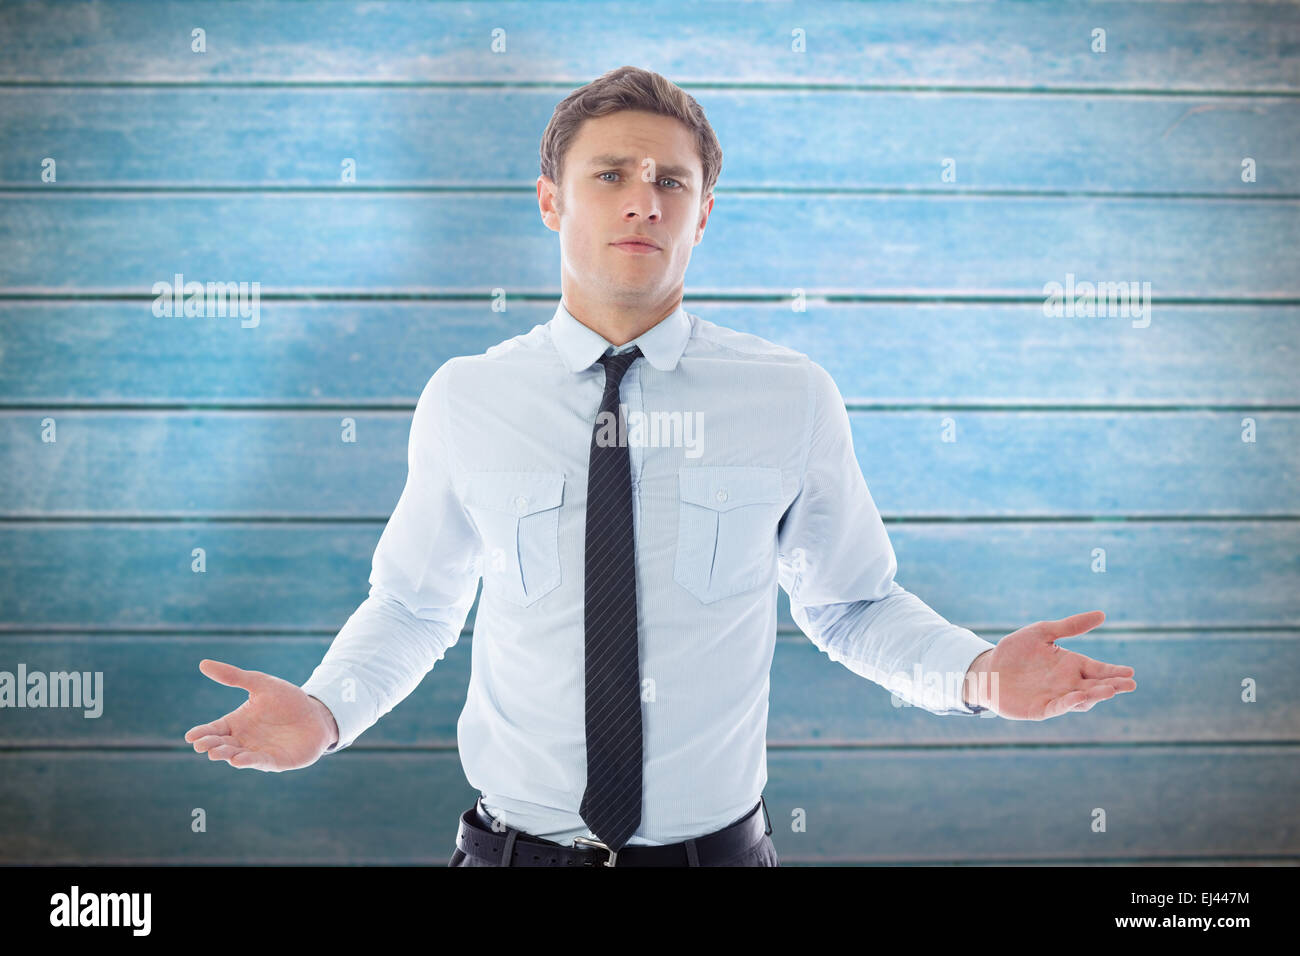 Composite image of puzzled businessman Stock Photo